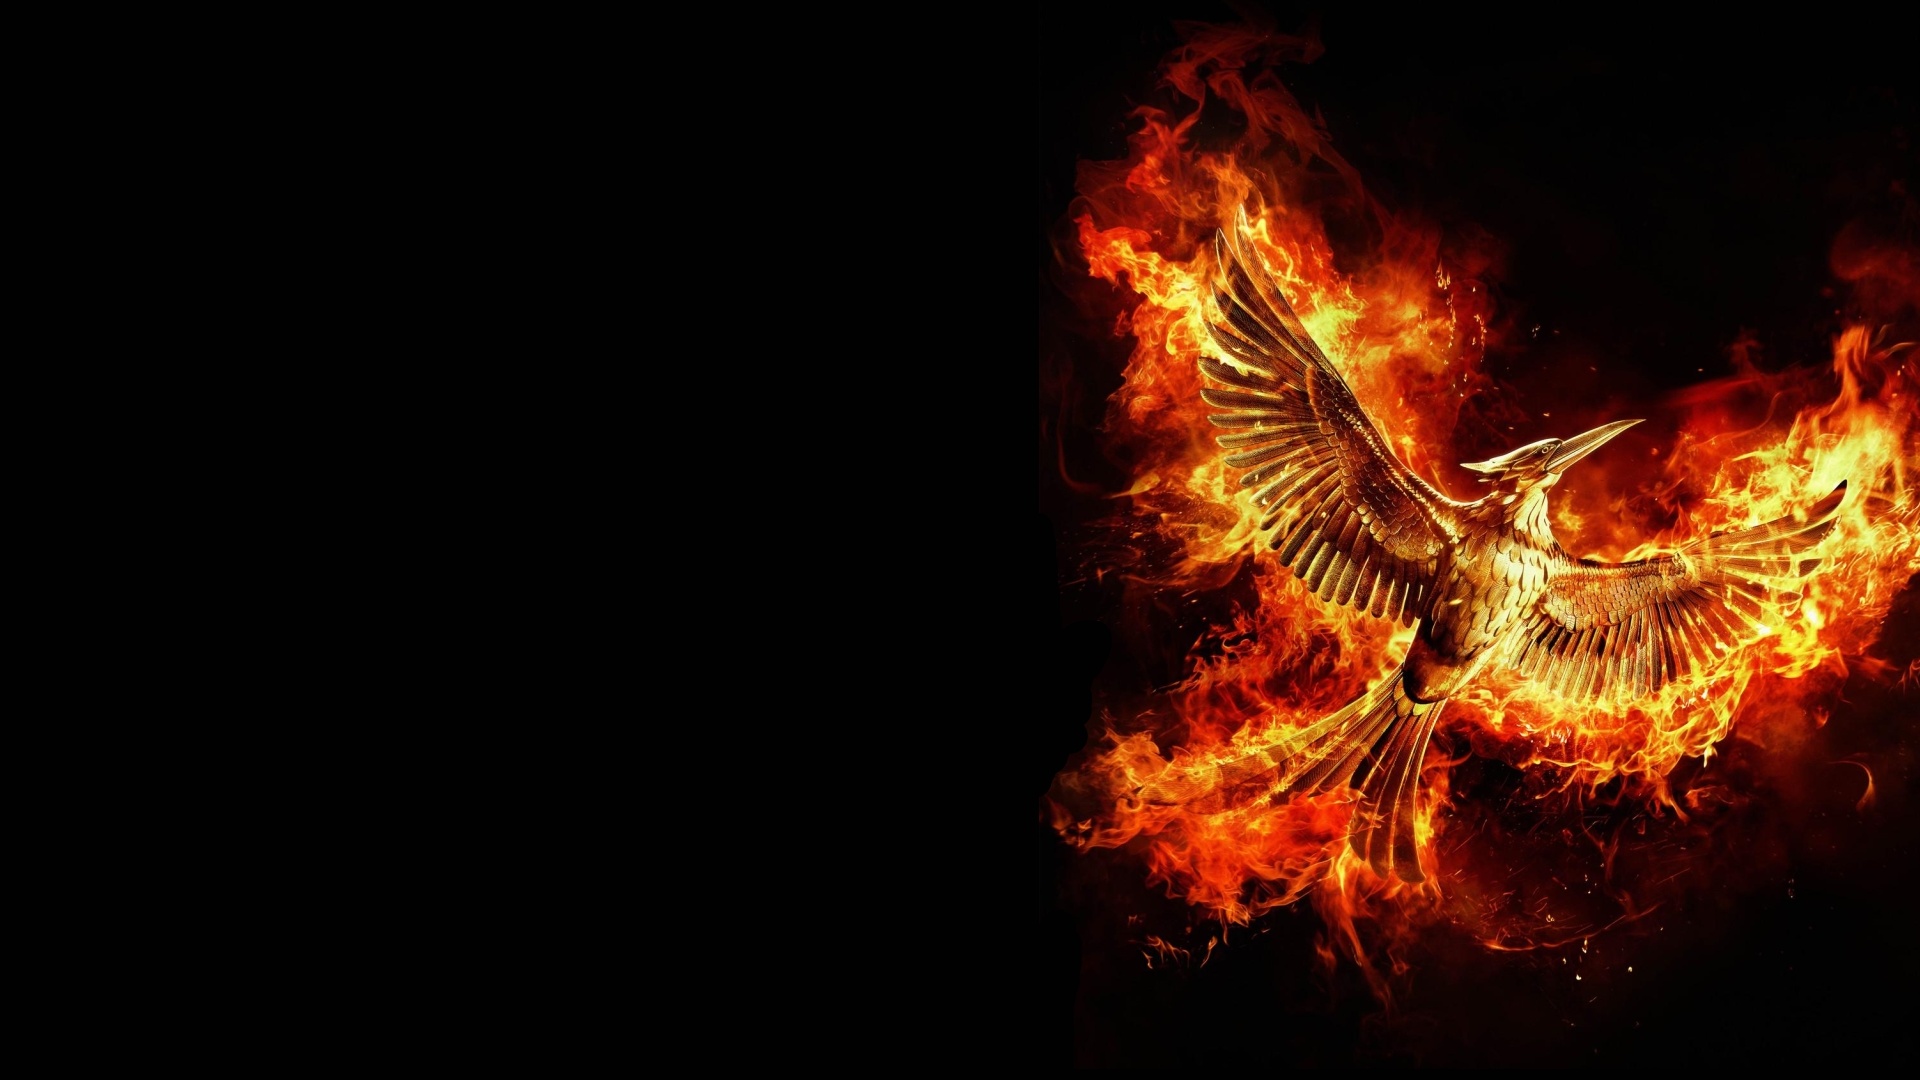 Hunger Games Wallpaper Hunger Games Backgrounds and